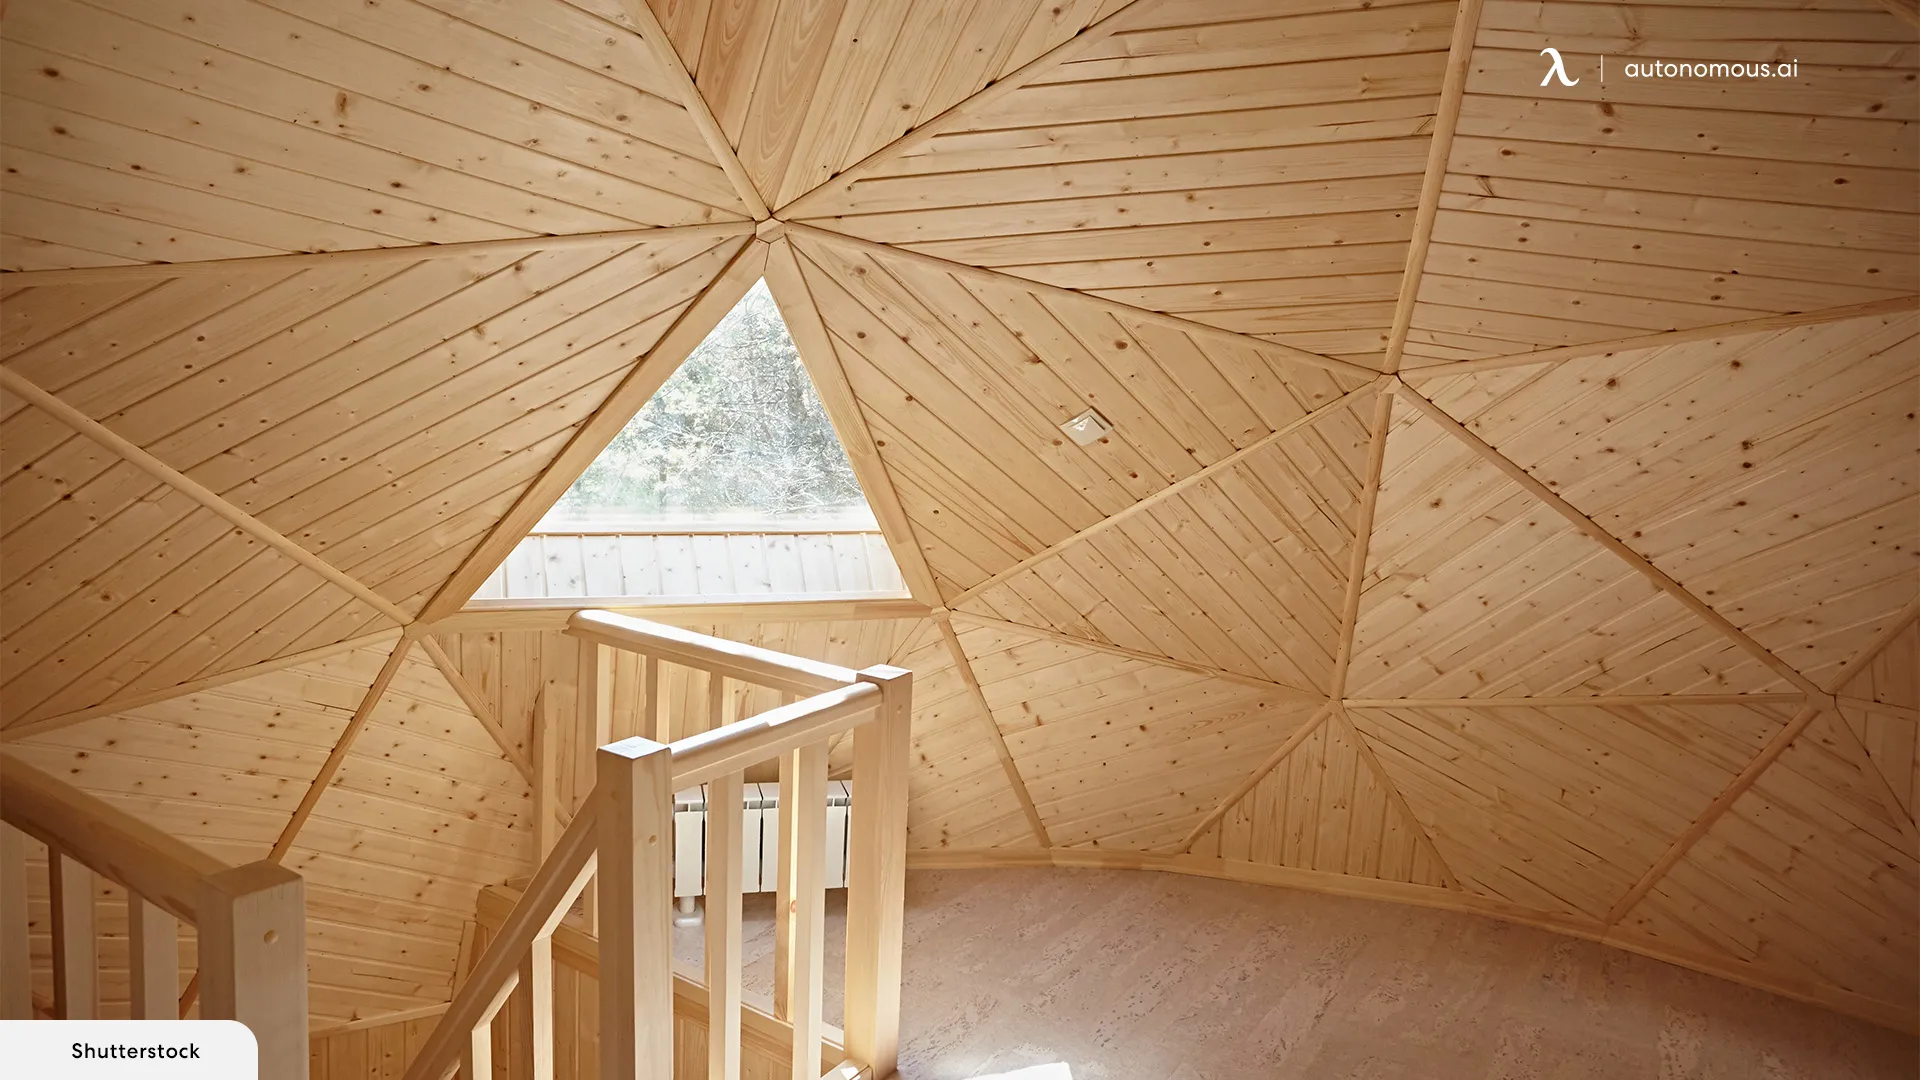 How to Build a Geodesic Dome Dwelling?